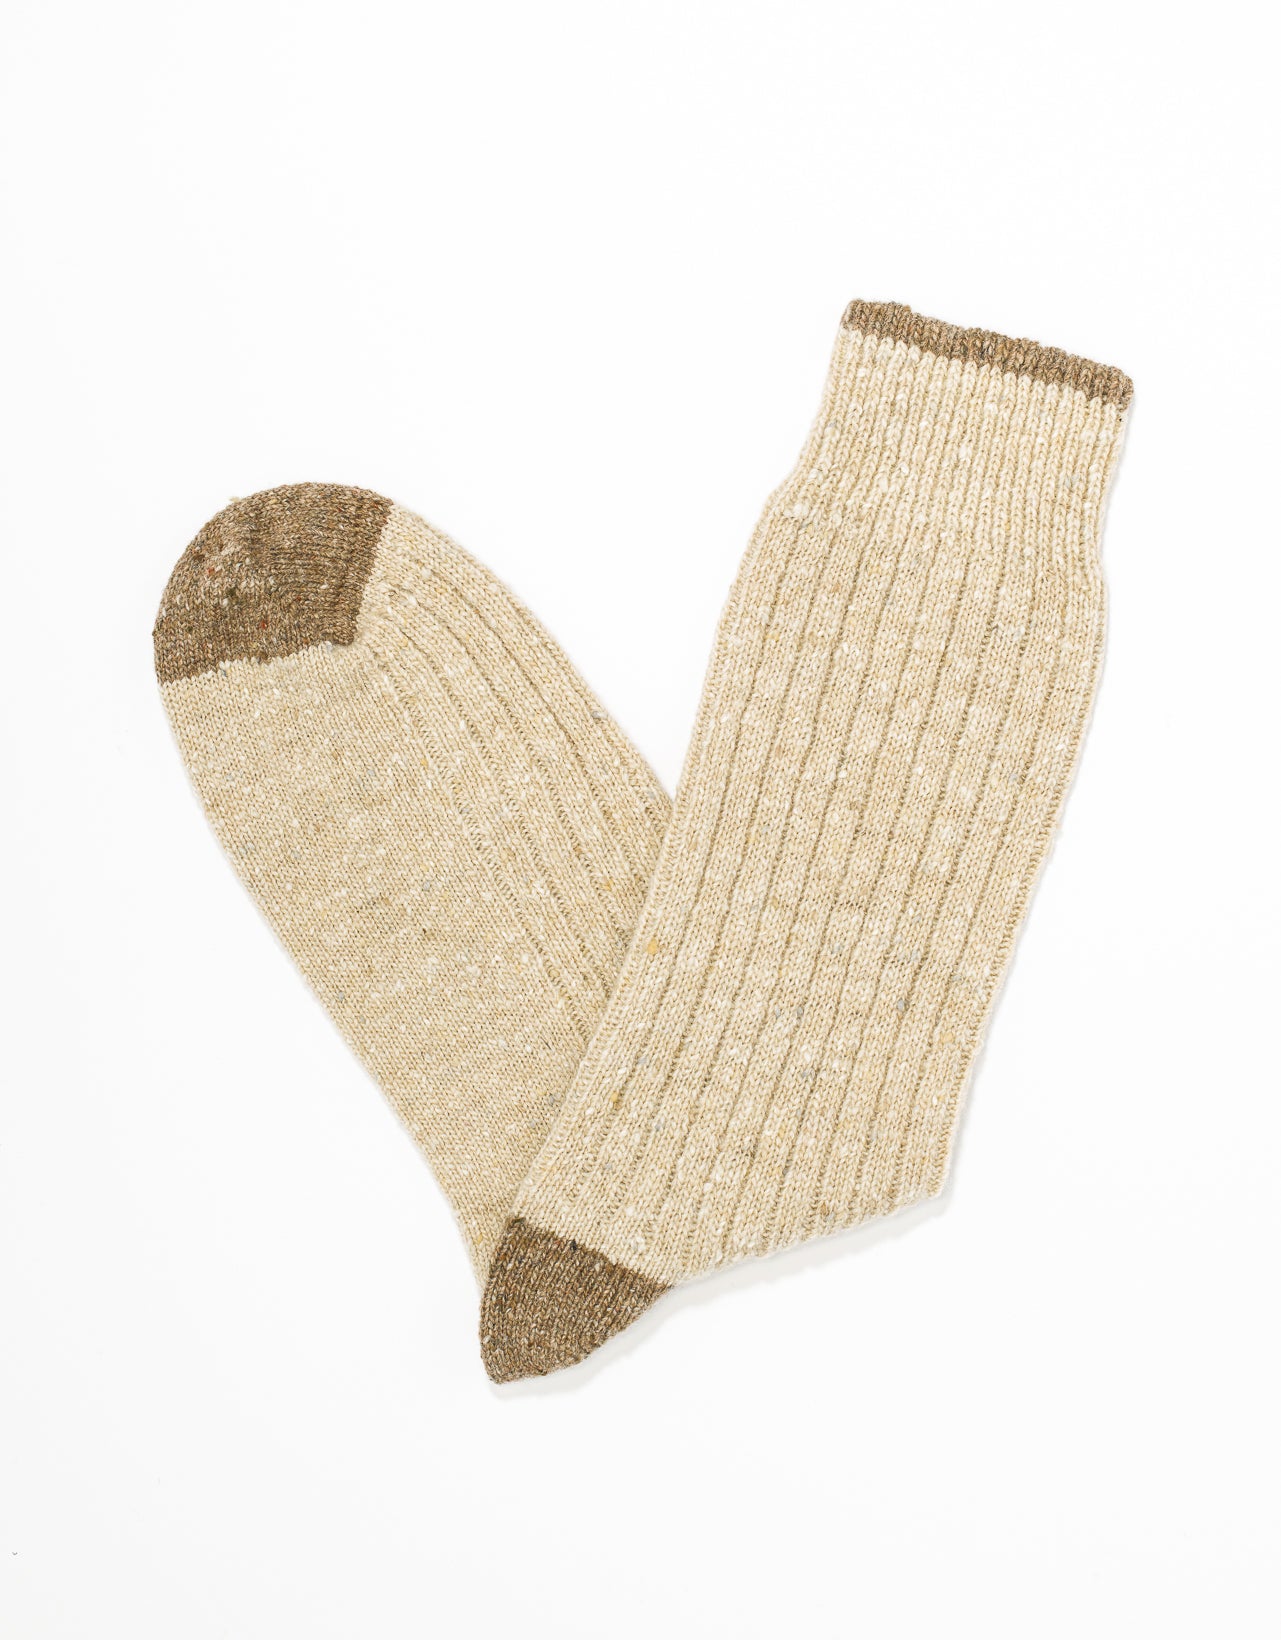 CONTRAST HEEL AND TOE DONEGAL SOCKS - NATURAL/BROWN